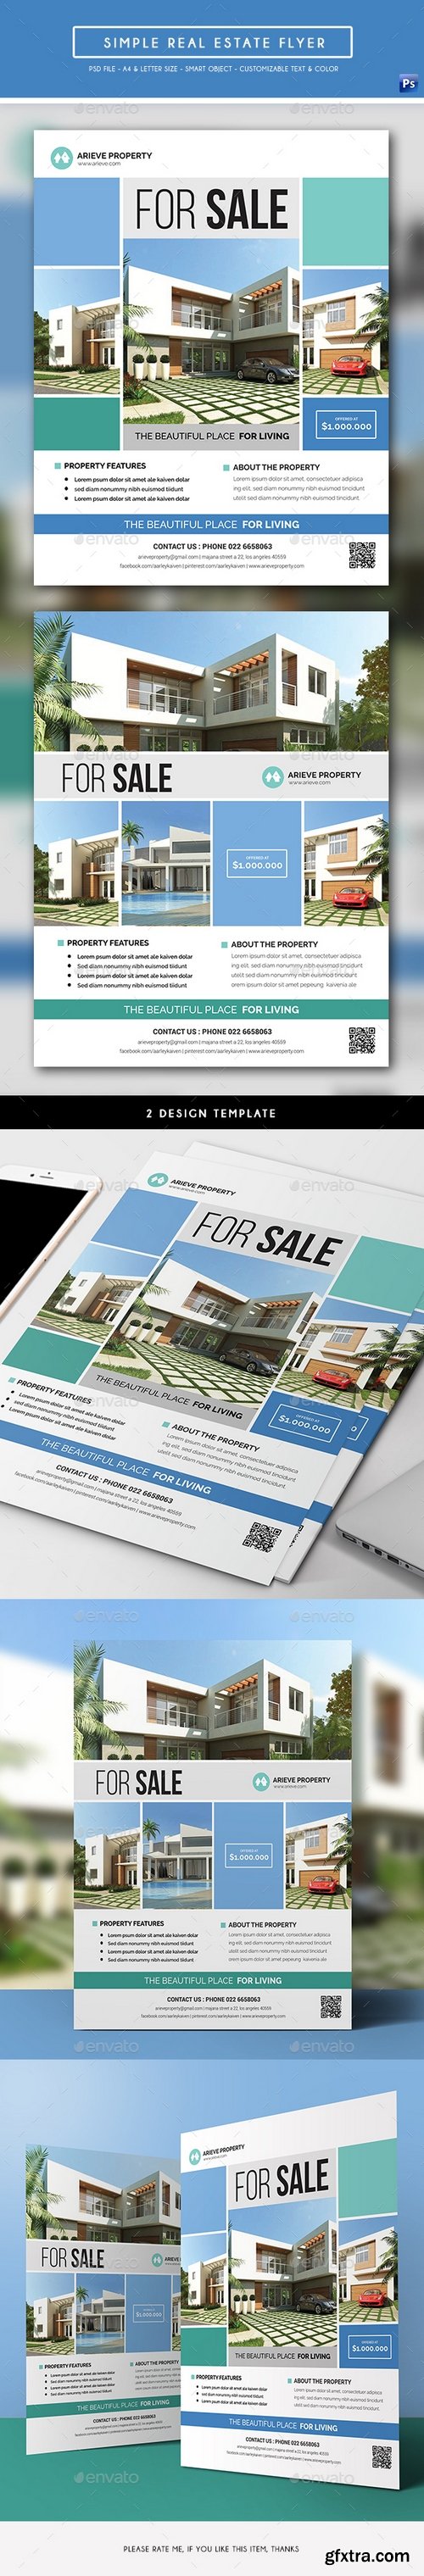 Graphicriver - Simple Real Estate Flyer 16779881